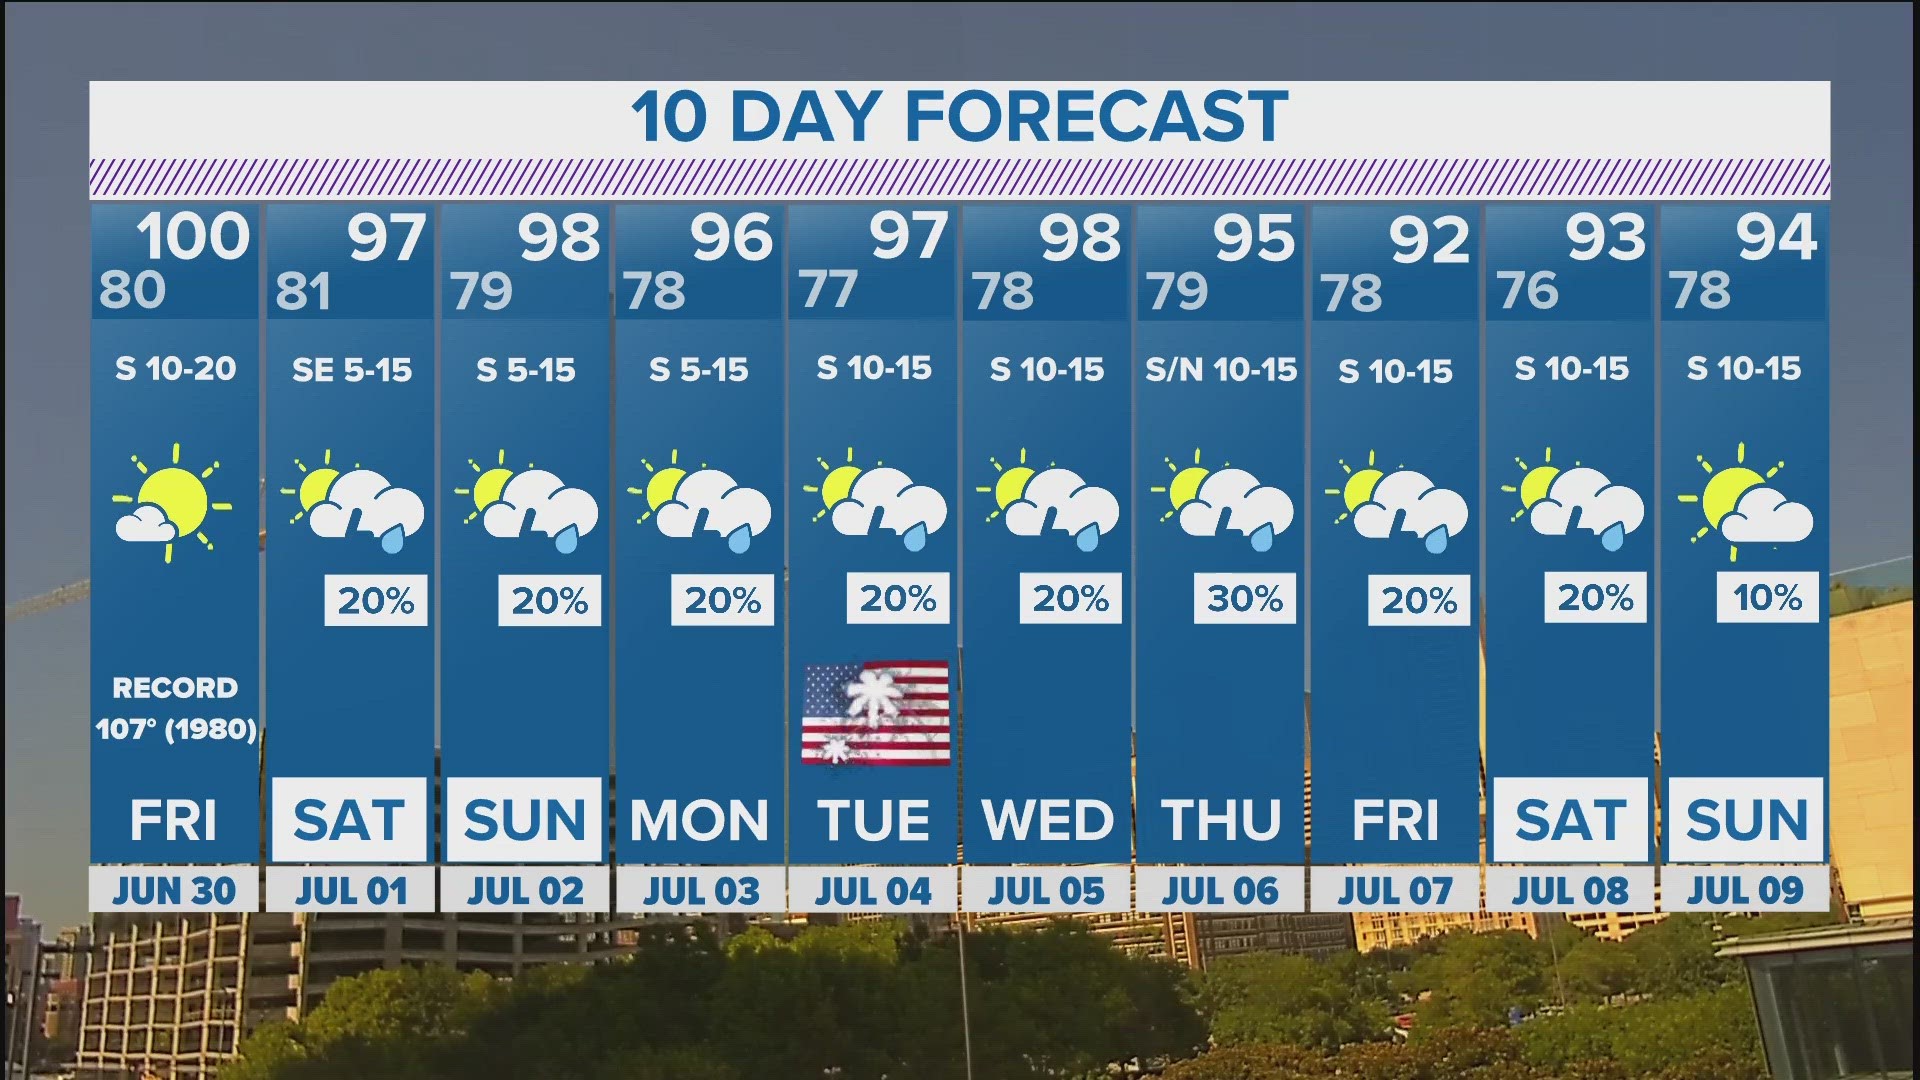 DFW Weather Less 100degree days expected in 10day forecast